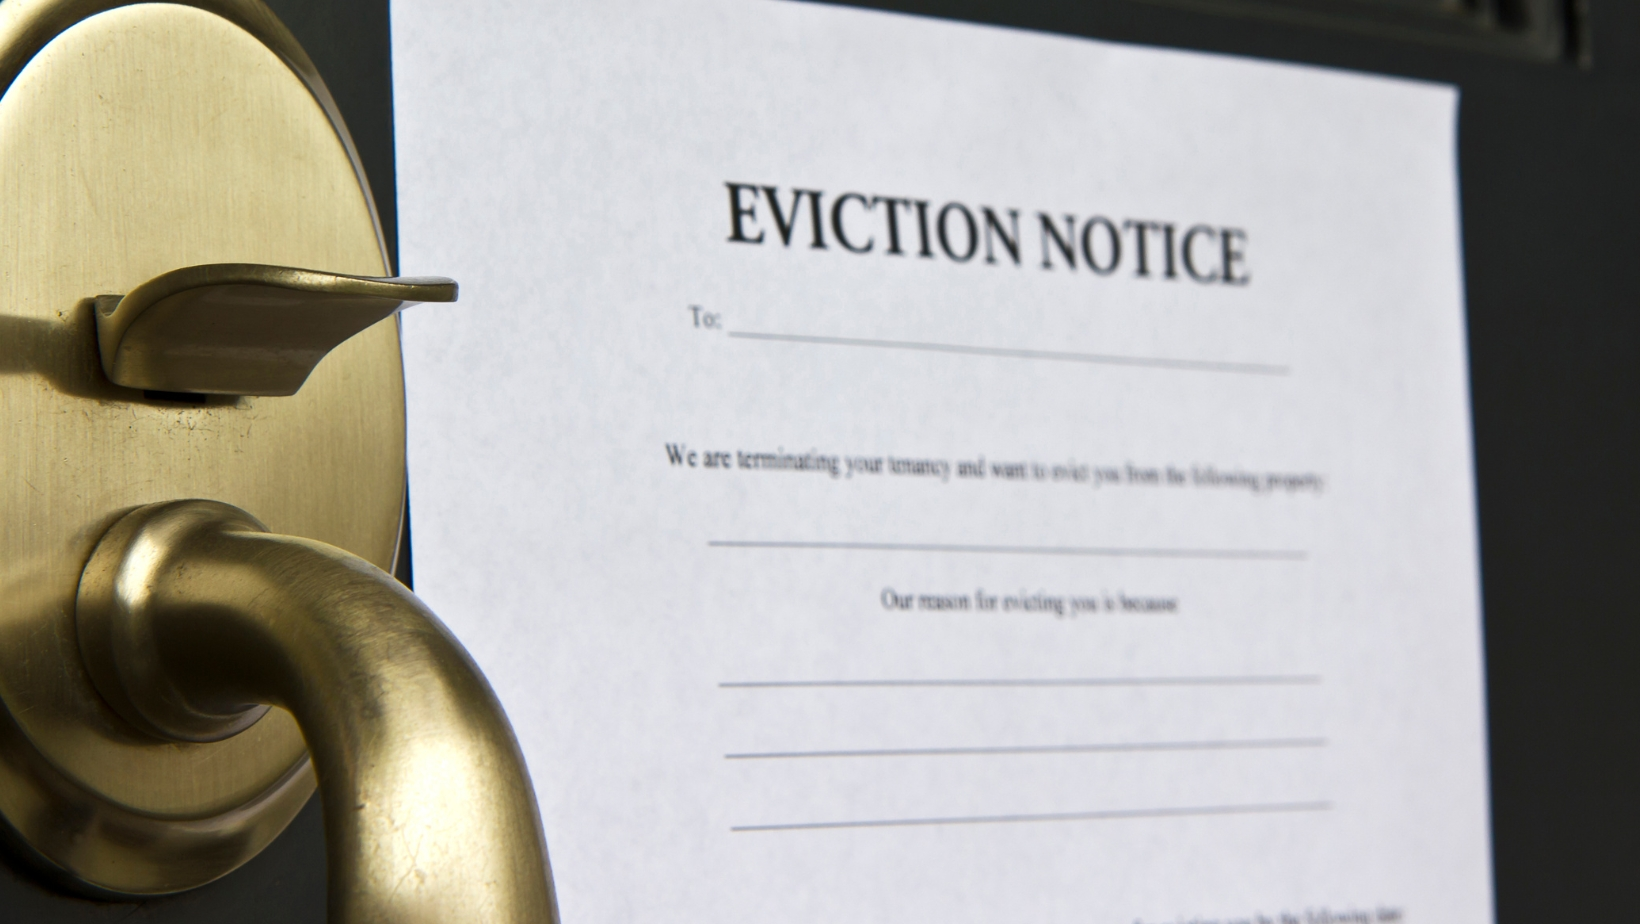 Best property management company eviction policy